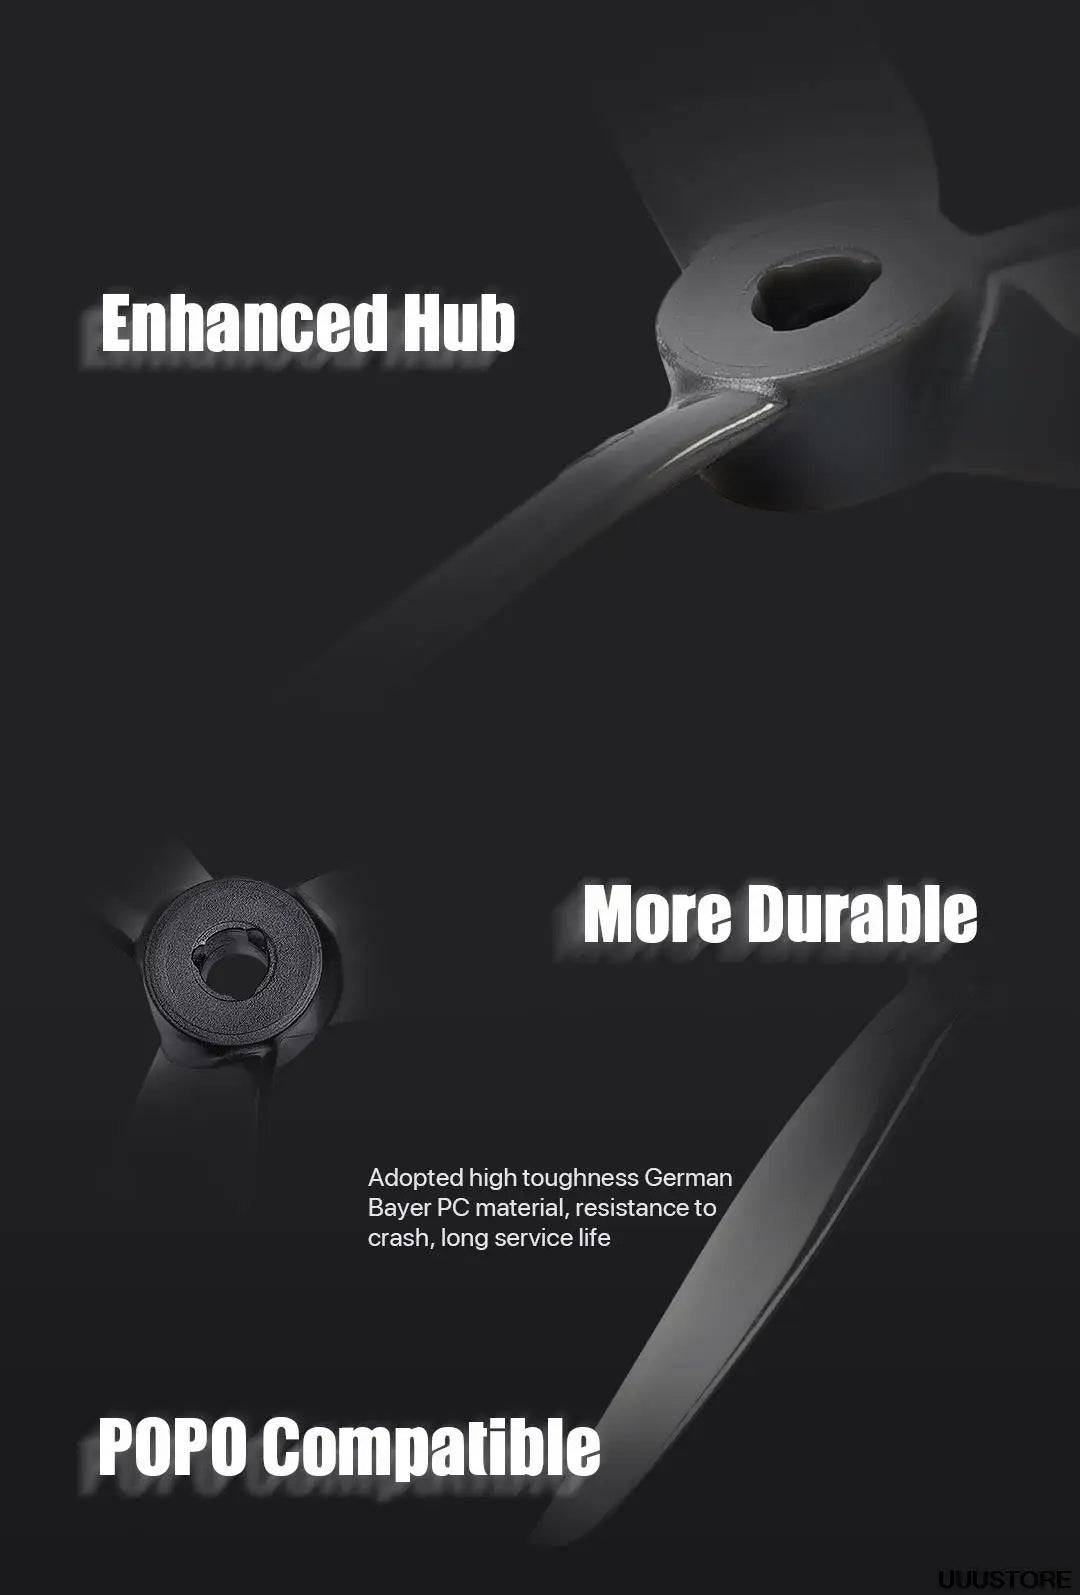 Enhanced Hub More Durable Adopted high toughness German Bayer PC material, resistance to